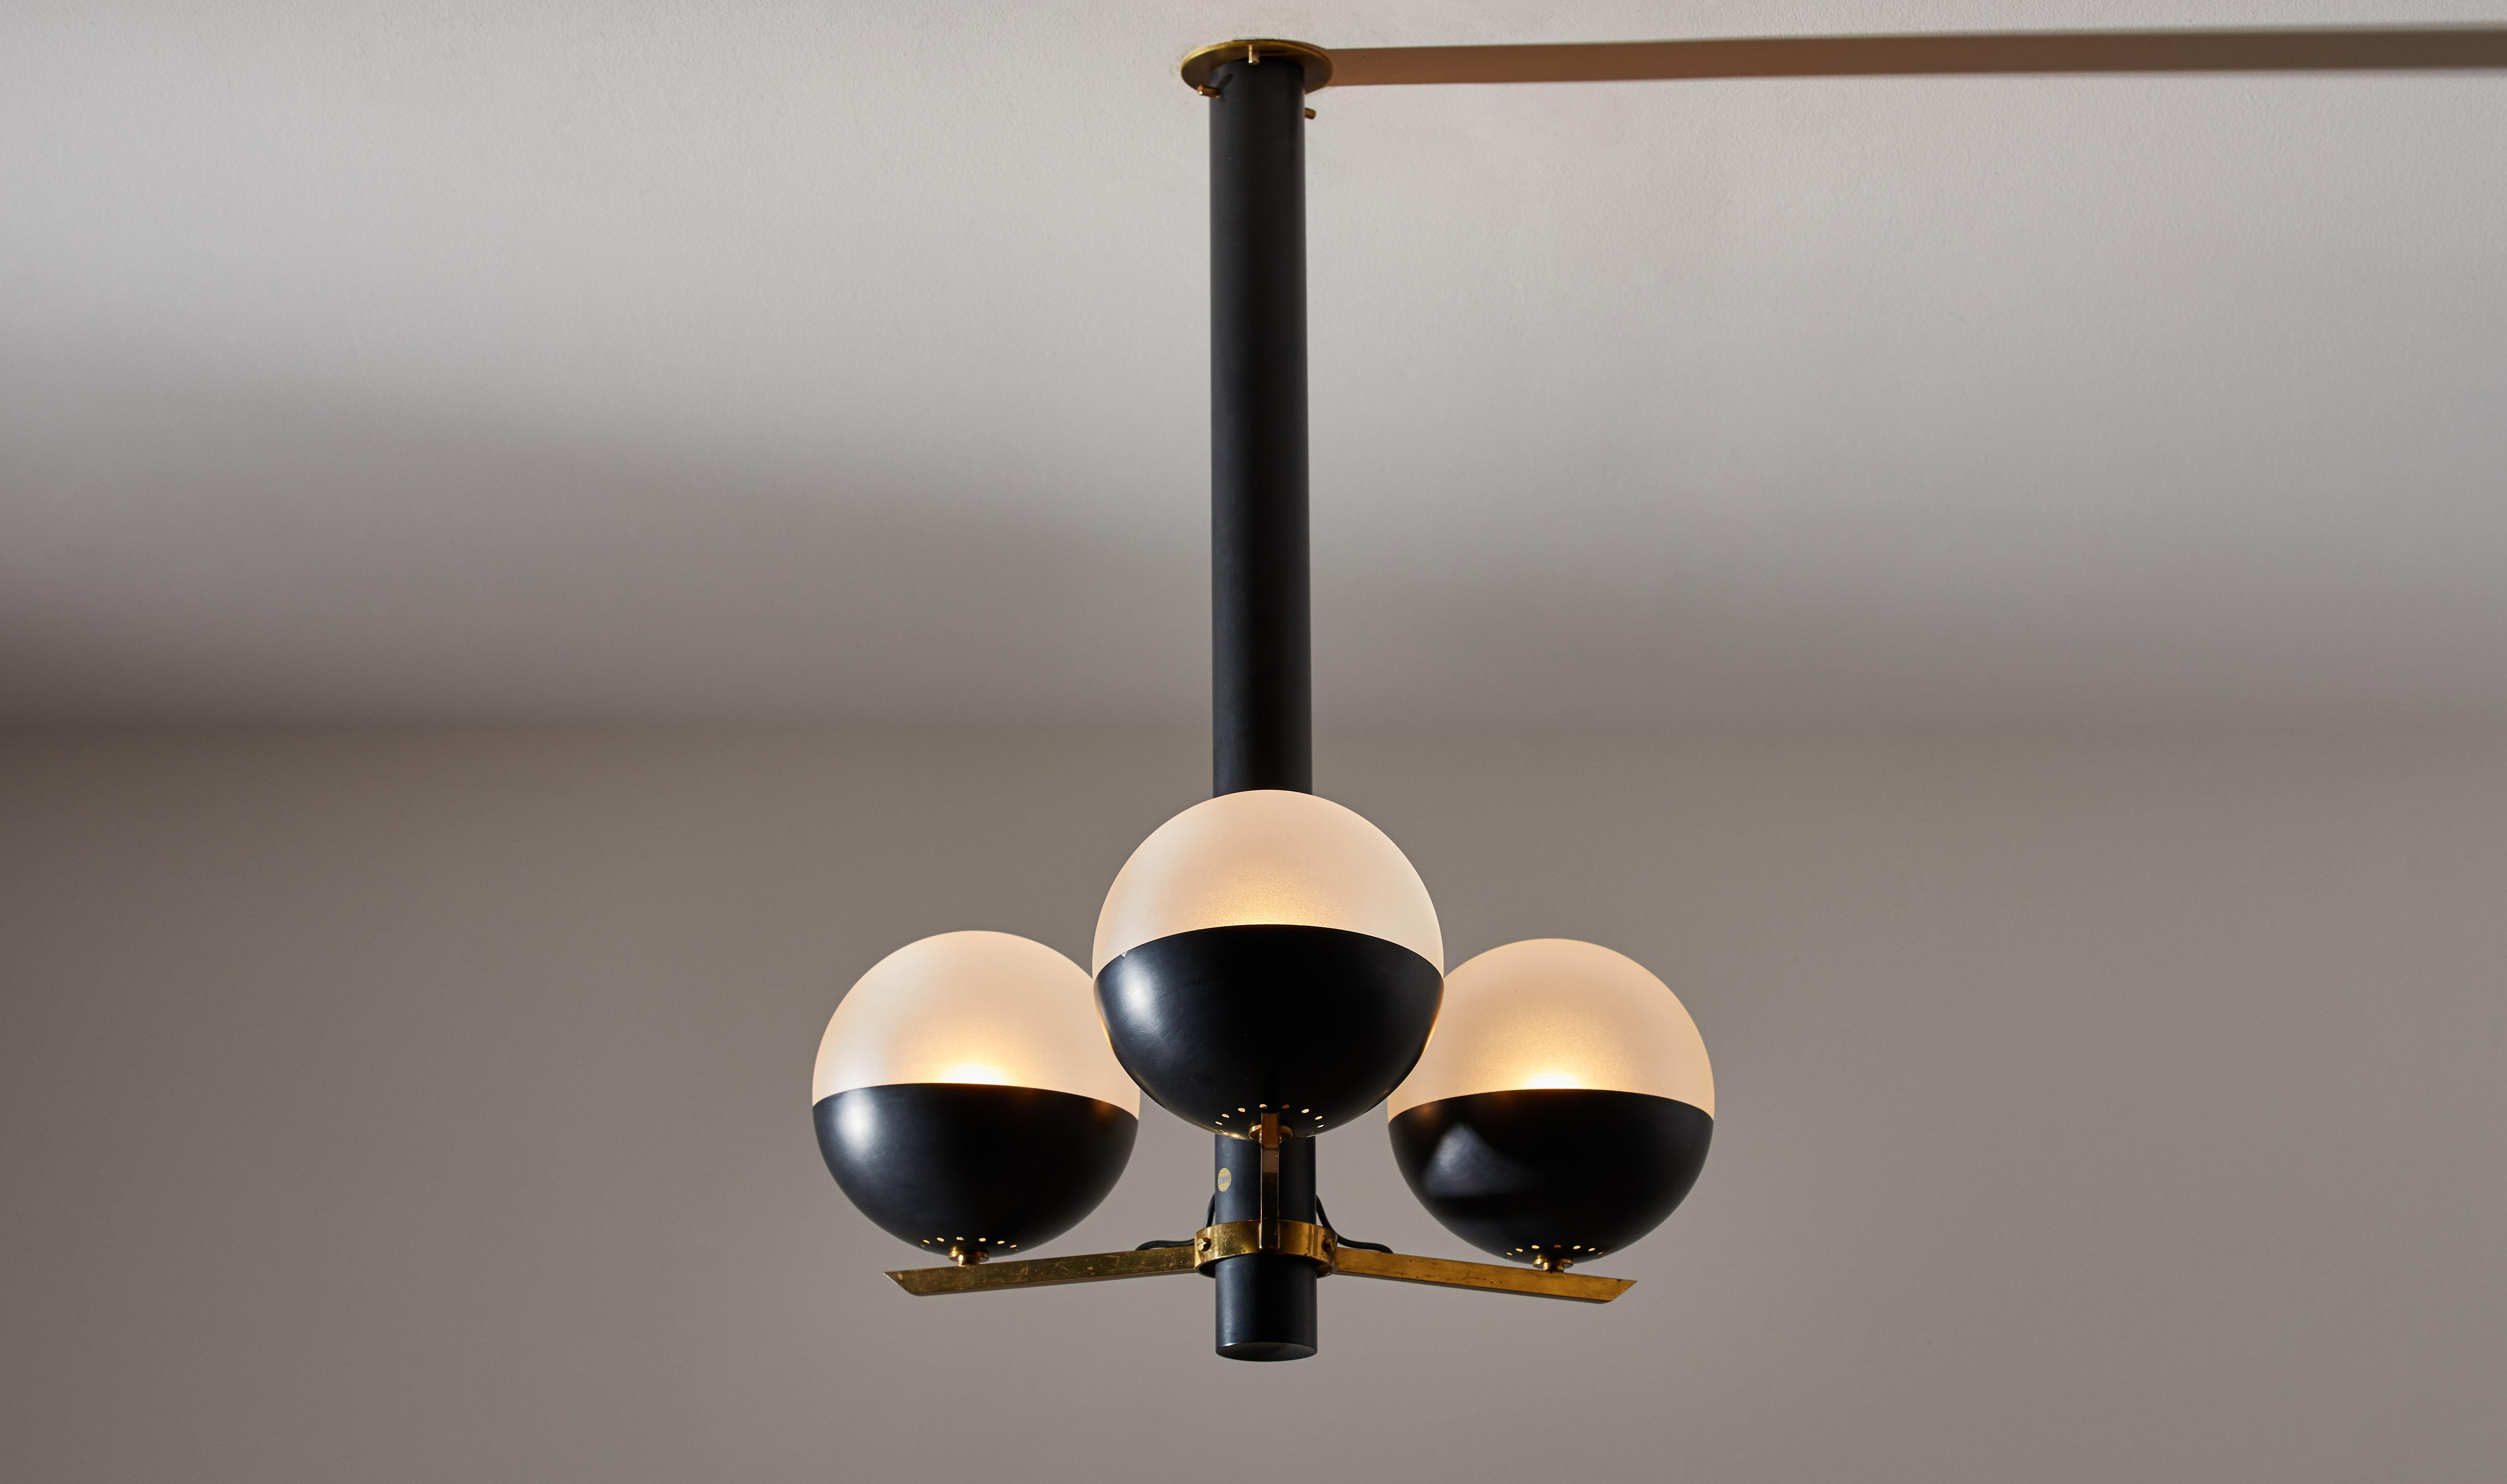 Suspension light by Stilnovo. Manufactured in Italy, circa 1960s. Enameled metal and opaline glass with brass hardware. Rewired for U.S. junction boxes. Custom brass ceiling plate. Takes three E27 60w maximum bulbs. Bulbs provided as a onetime